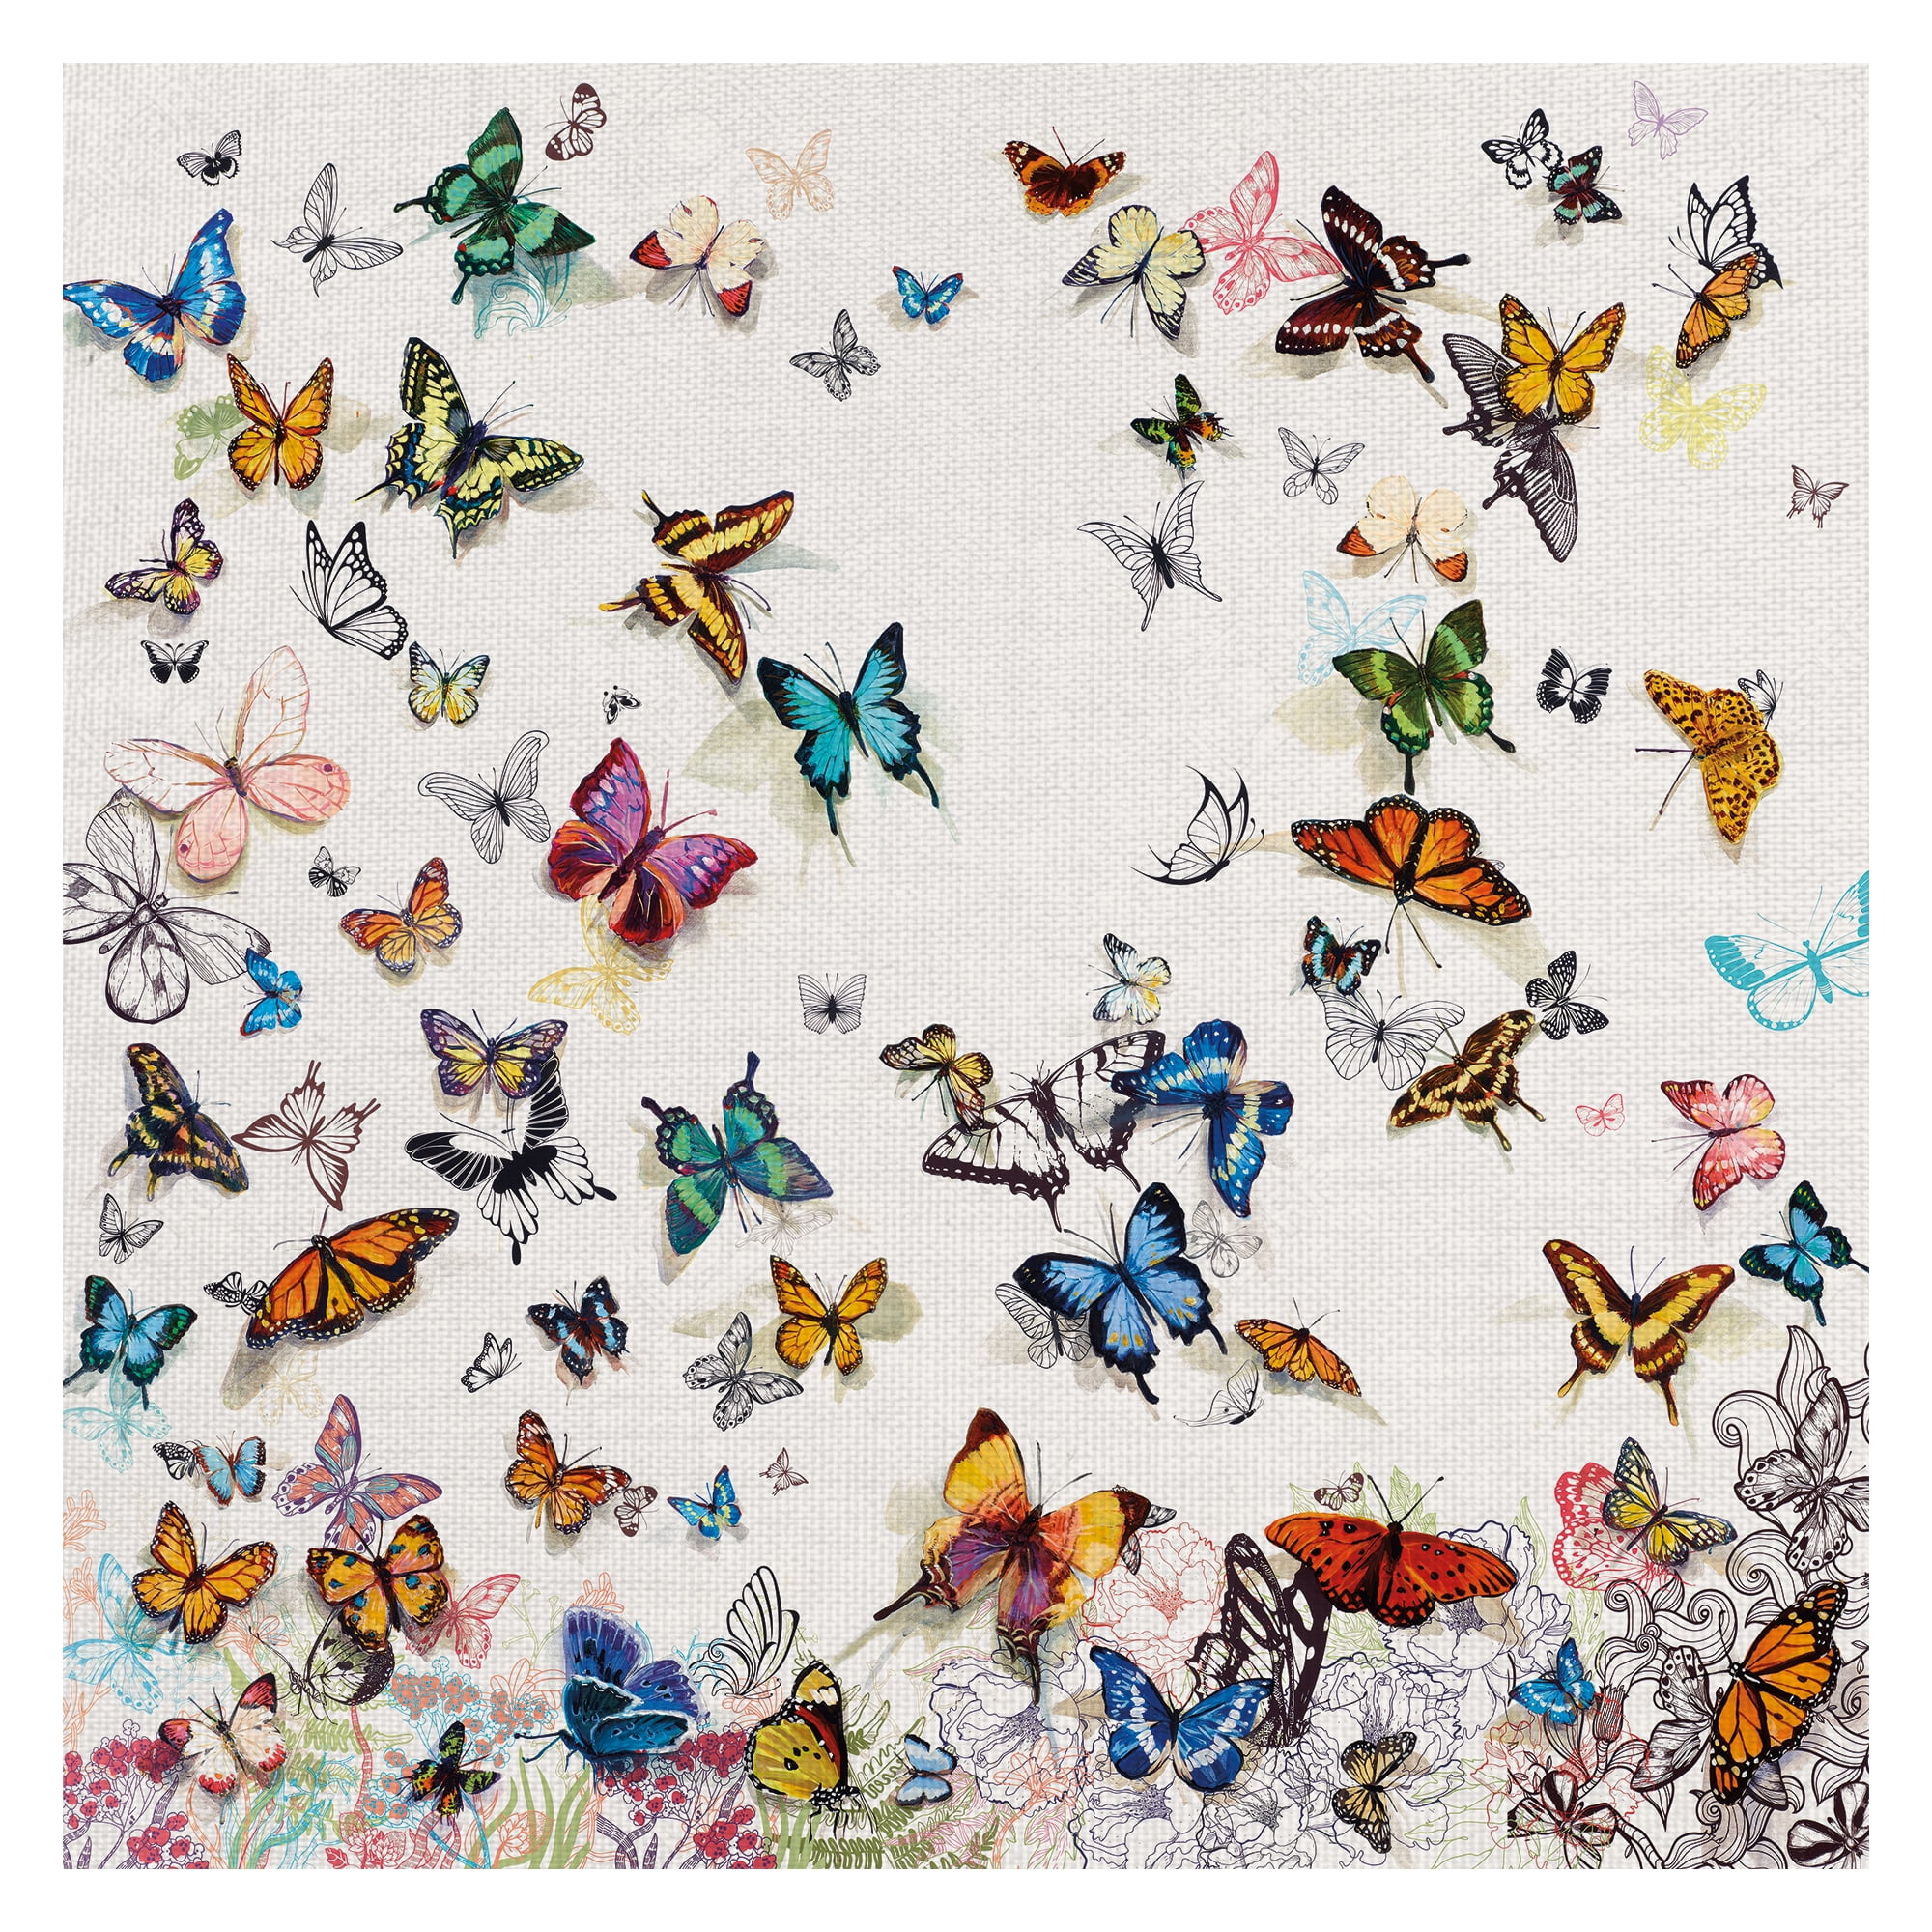 xbo 359 Personalized address labels butterflies Buy 3 get 1 free 